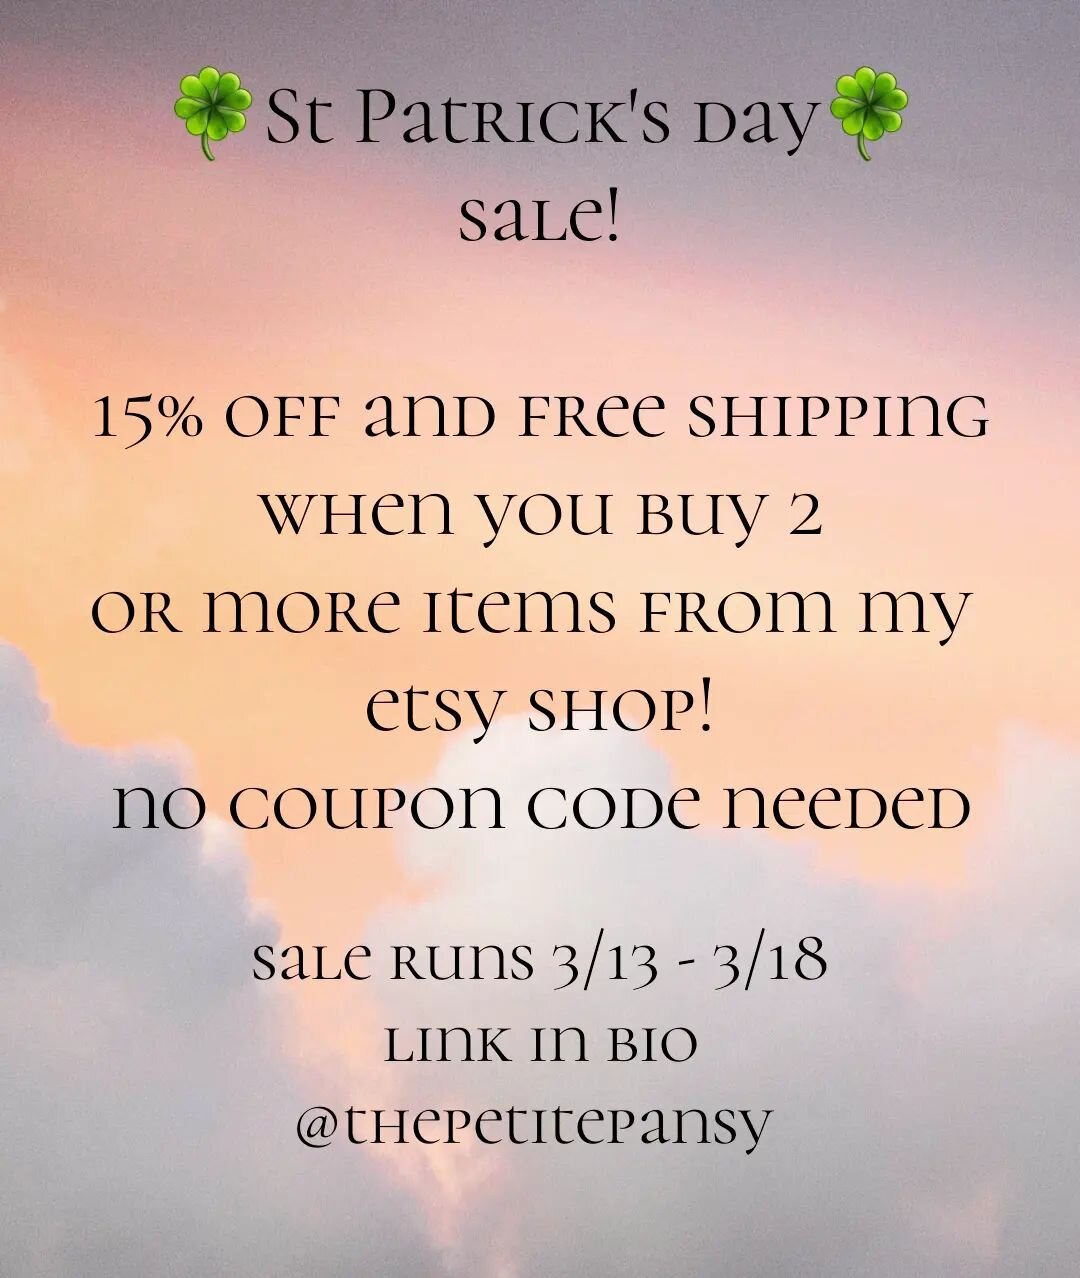 In celebration of Saint Patricks Day, I am offering 15% off 2 items or more in my shop! Plus free shipping!? 😱
No coupon code needed. Link to shop in my bio ❤
.
.
.
#stpatricksday #stpattysday #irish #kissmeimirish #etsyshop #etsydeal #15off #sale #